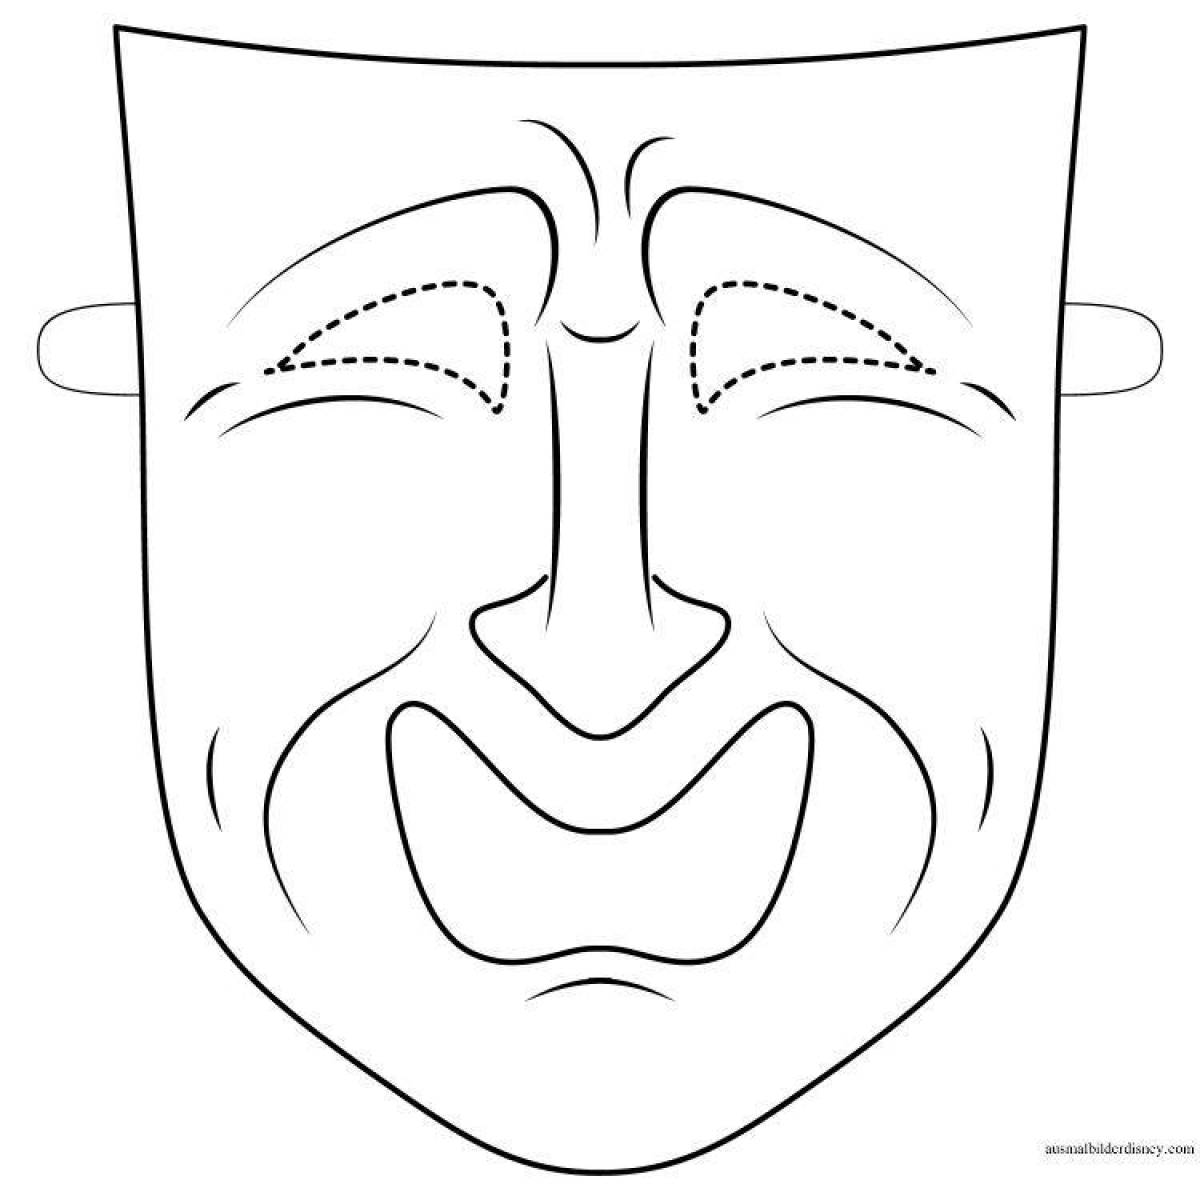 Sweet cloth mask coloring page